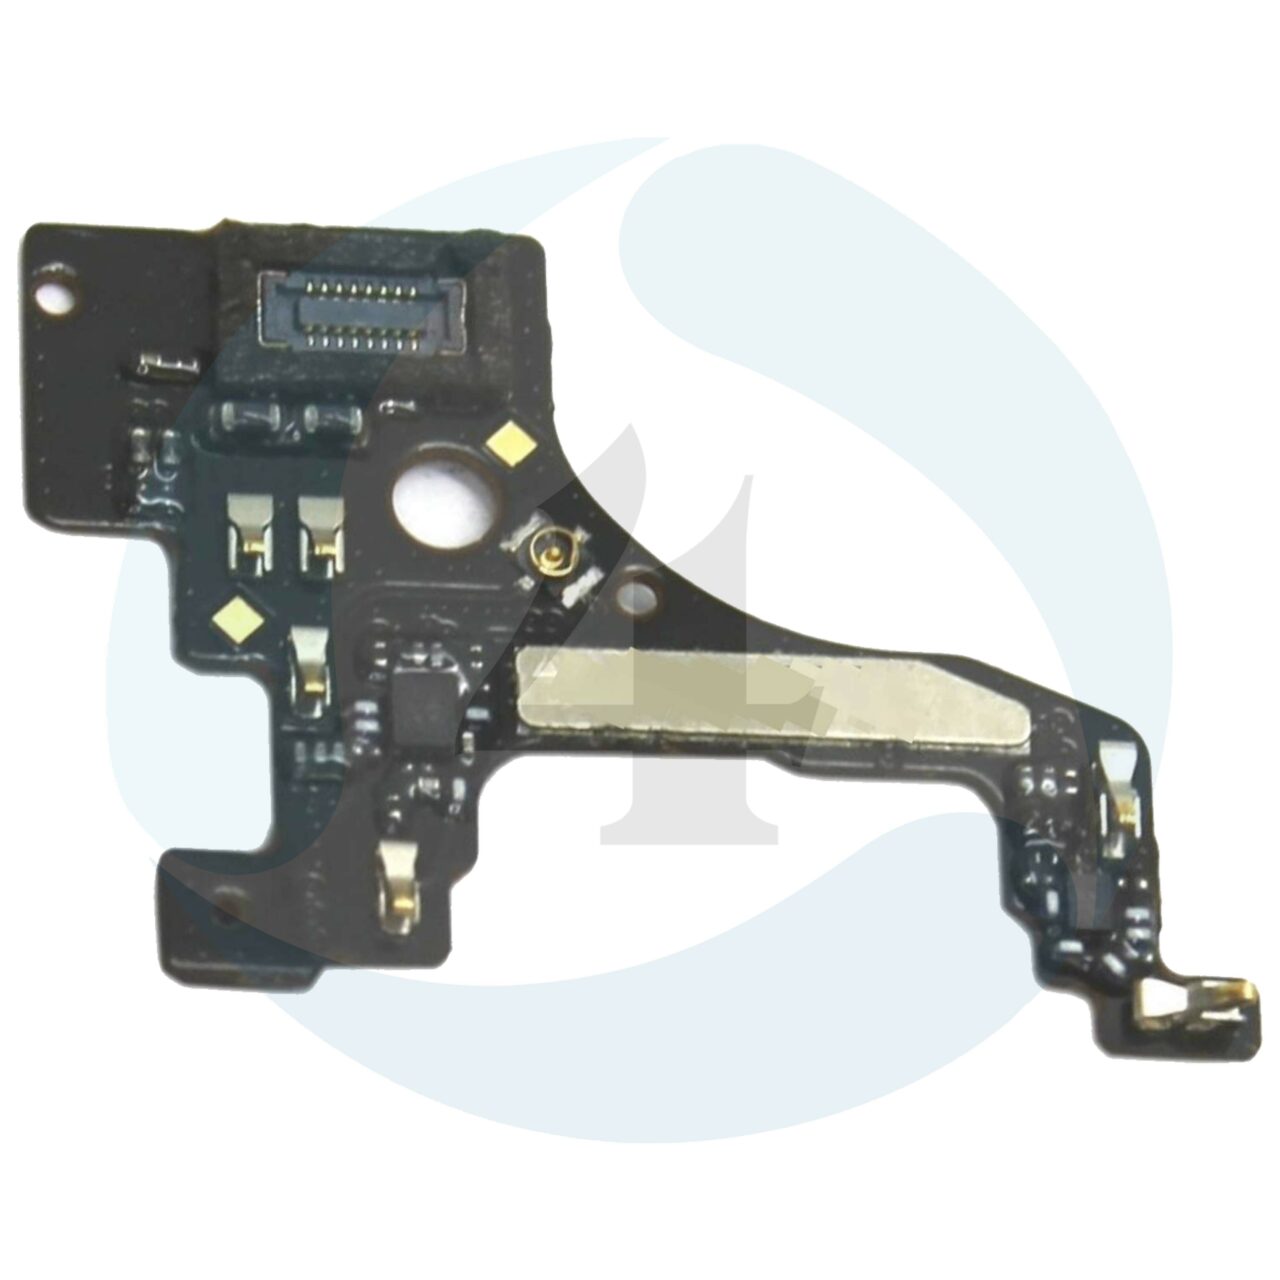 Microphone Module PCB Board For One Plus 5 T